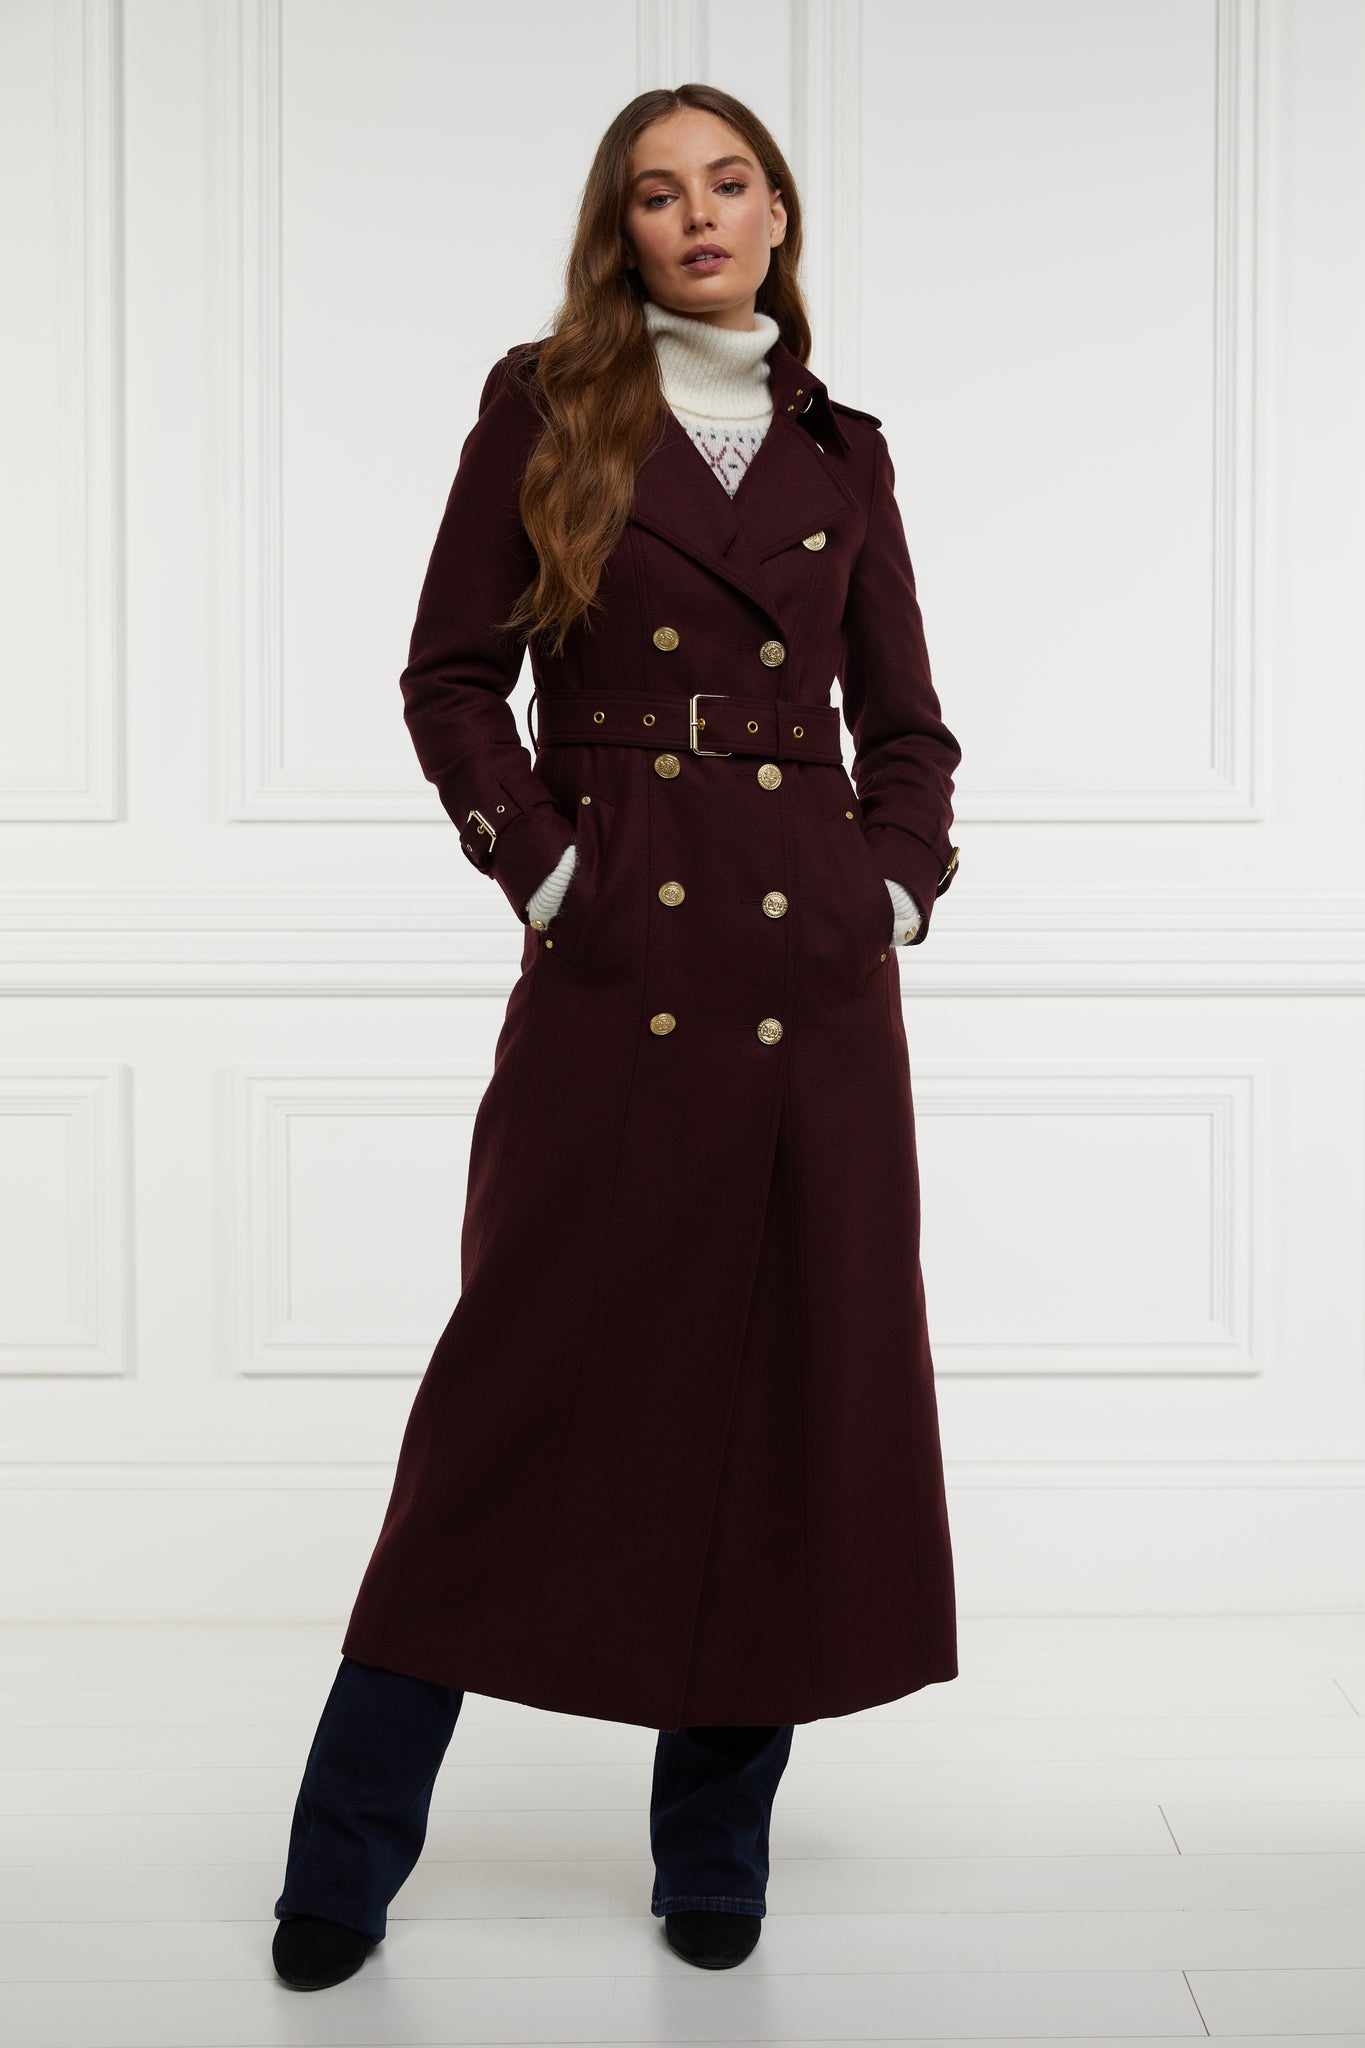 The Mulberry Look (Scarlet Martin)